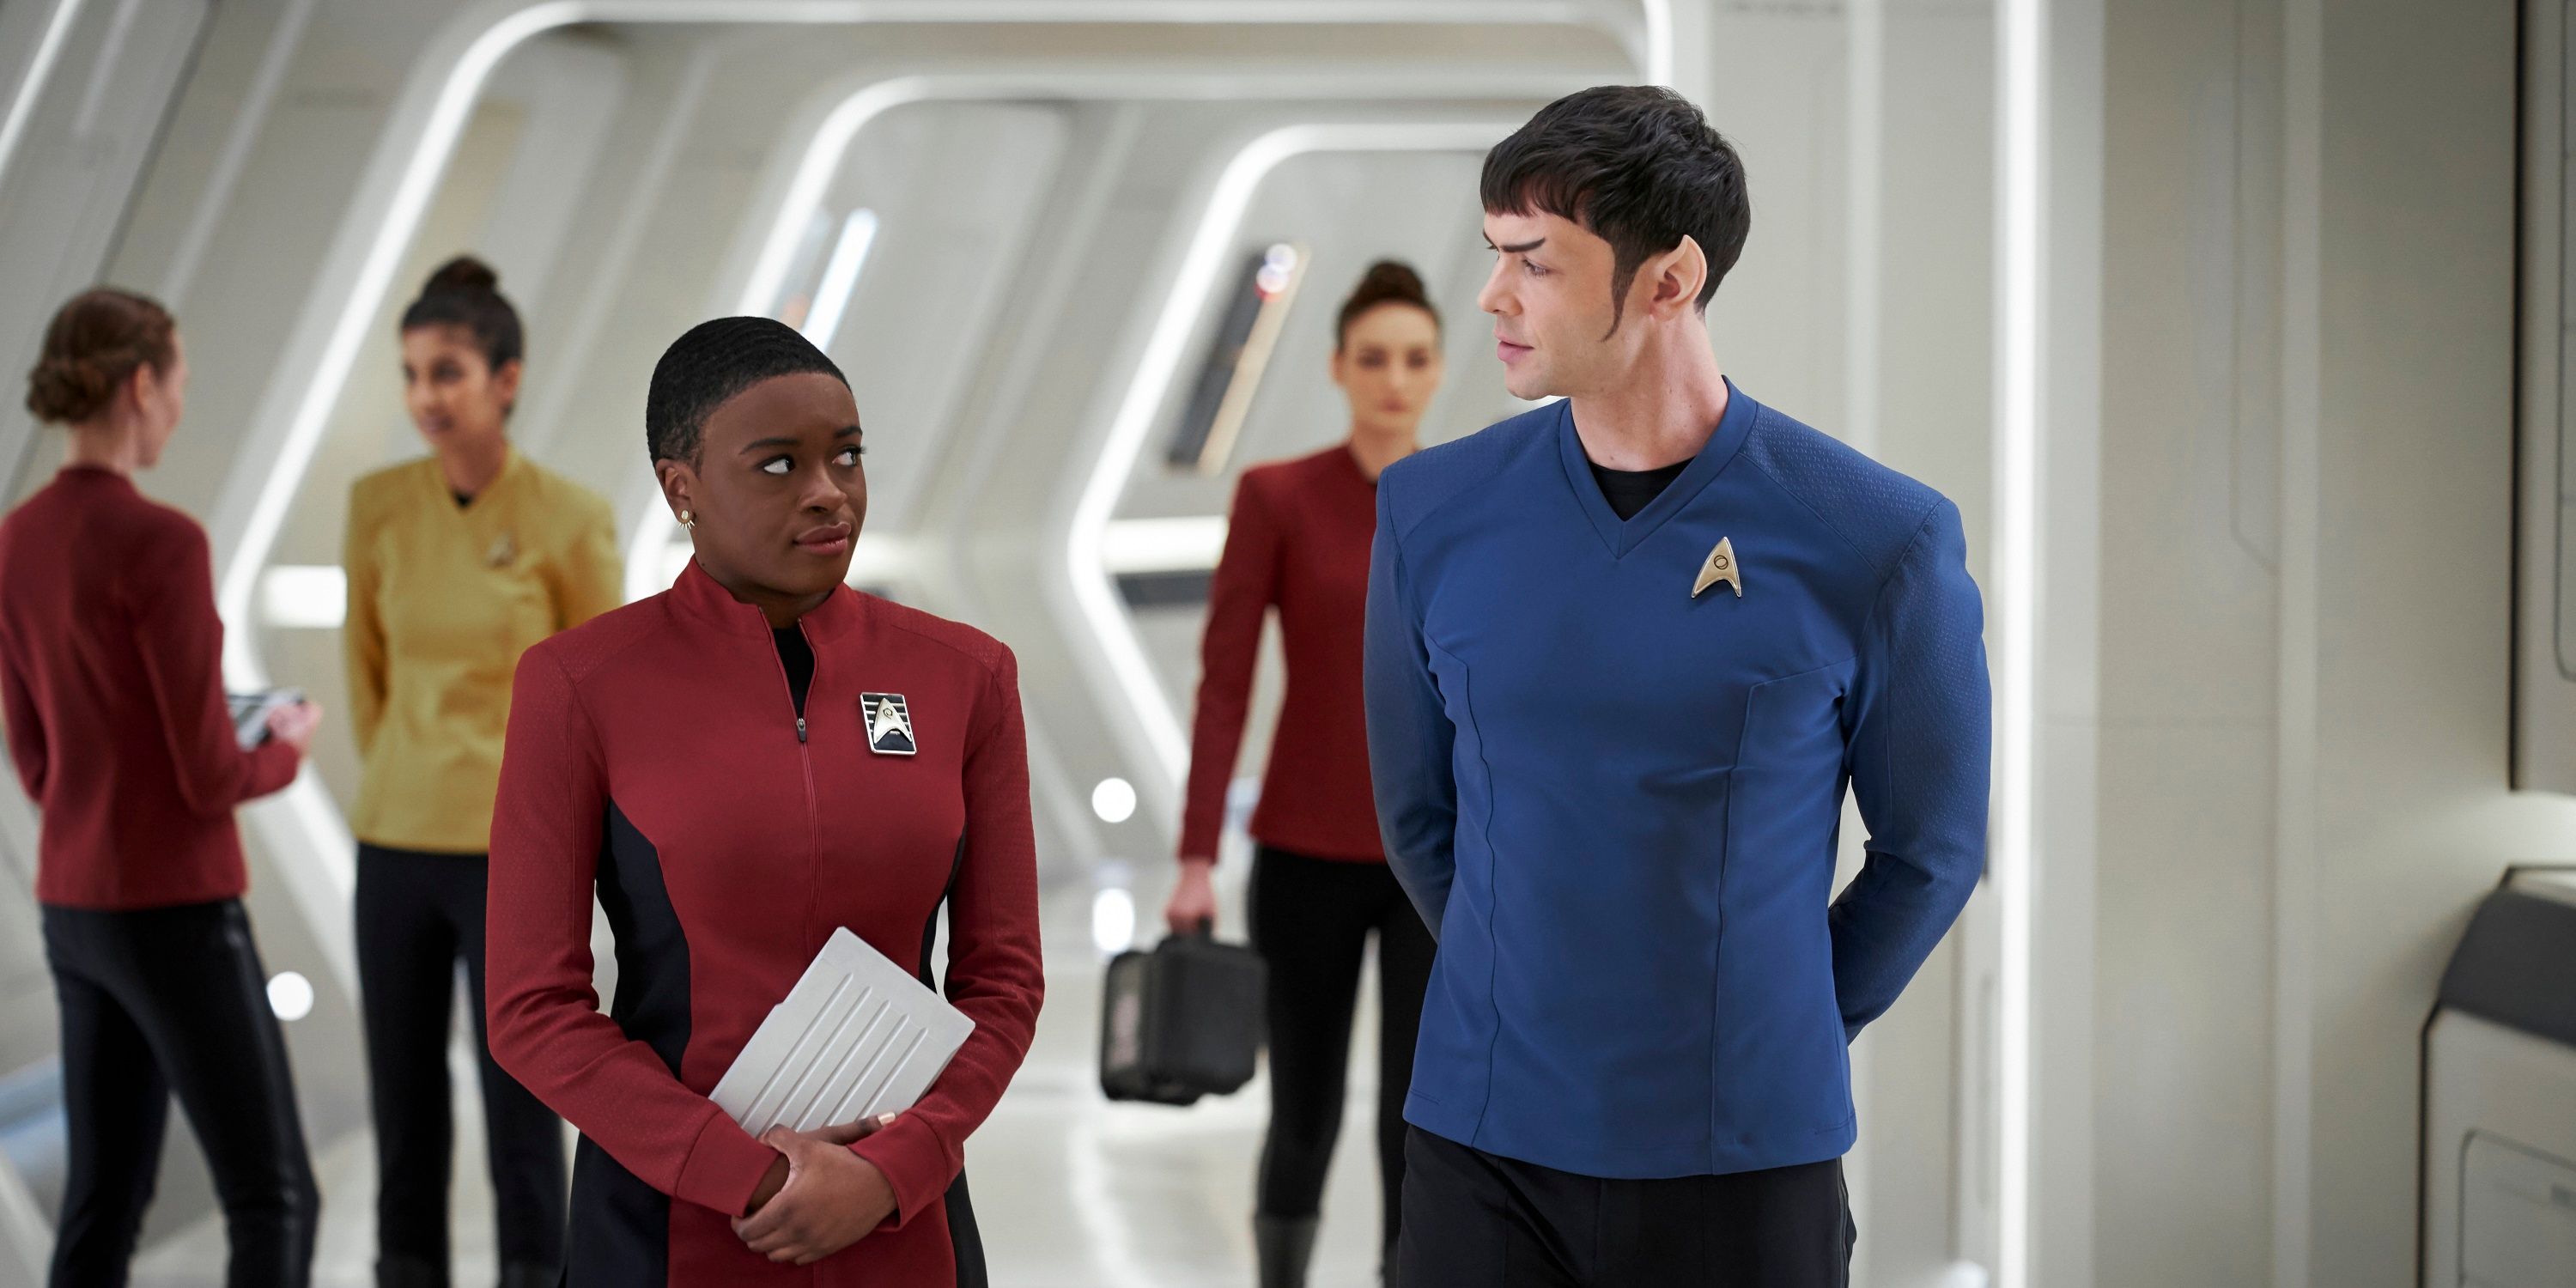 Celia Rose Gooding as Uhura and Ethan Peck as Spock walk the Enterprise in the Paramount+ original series Strange New Worlds.